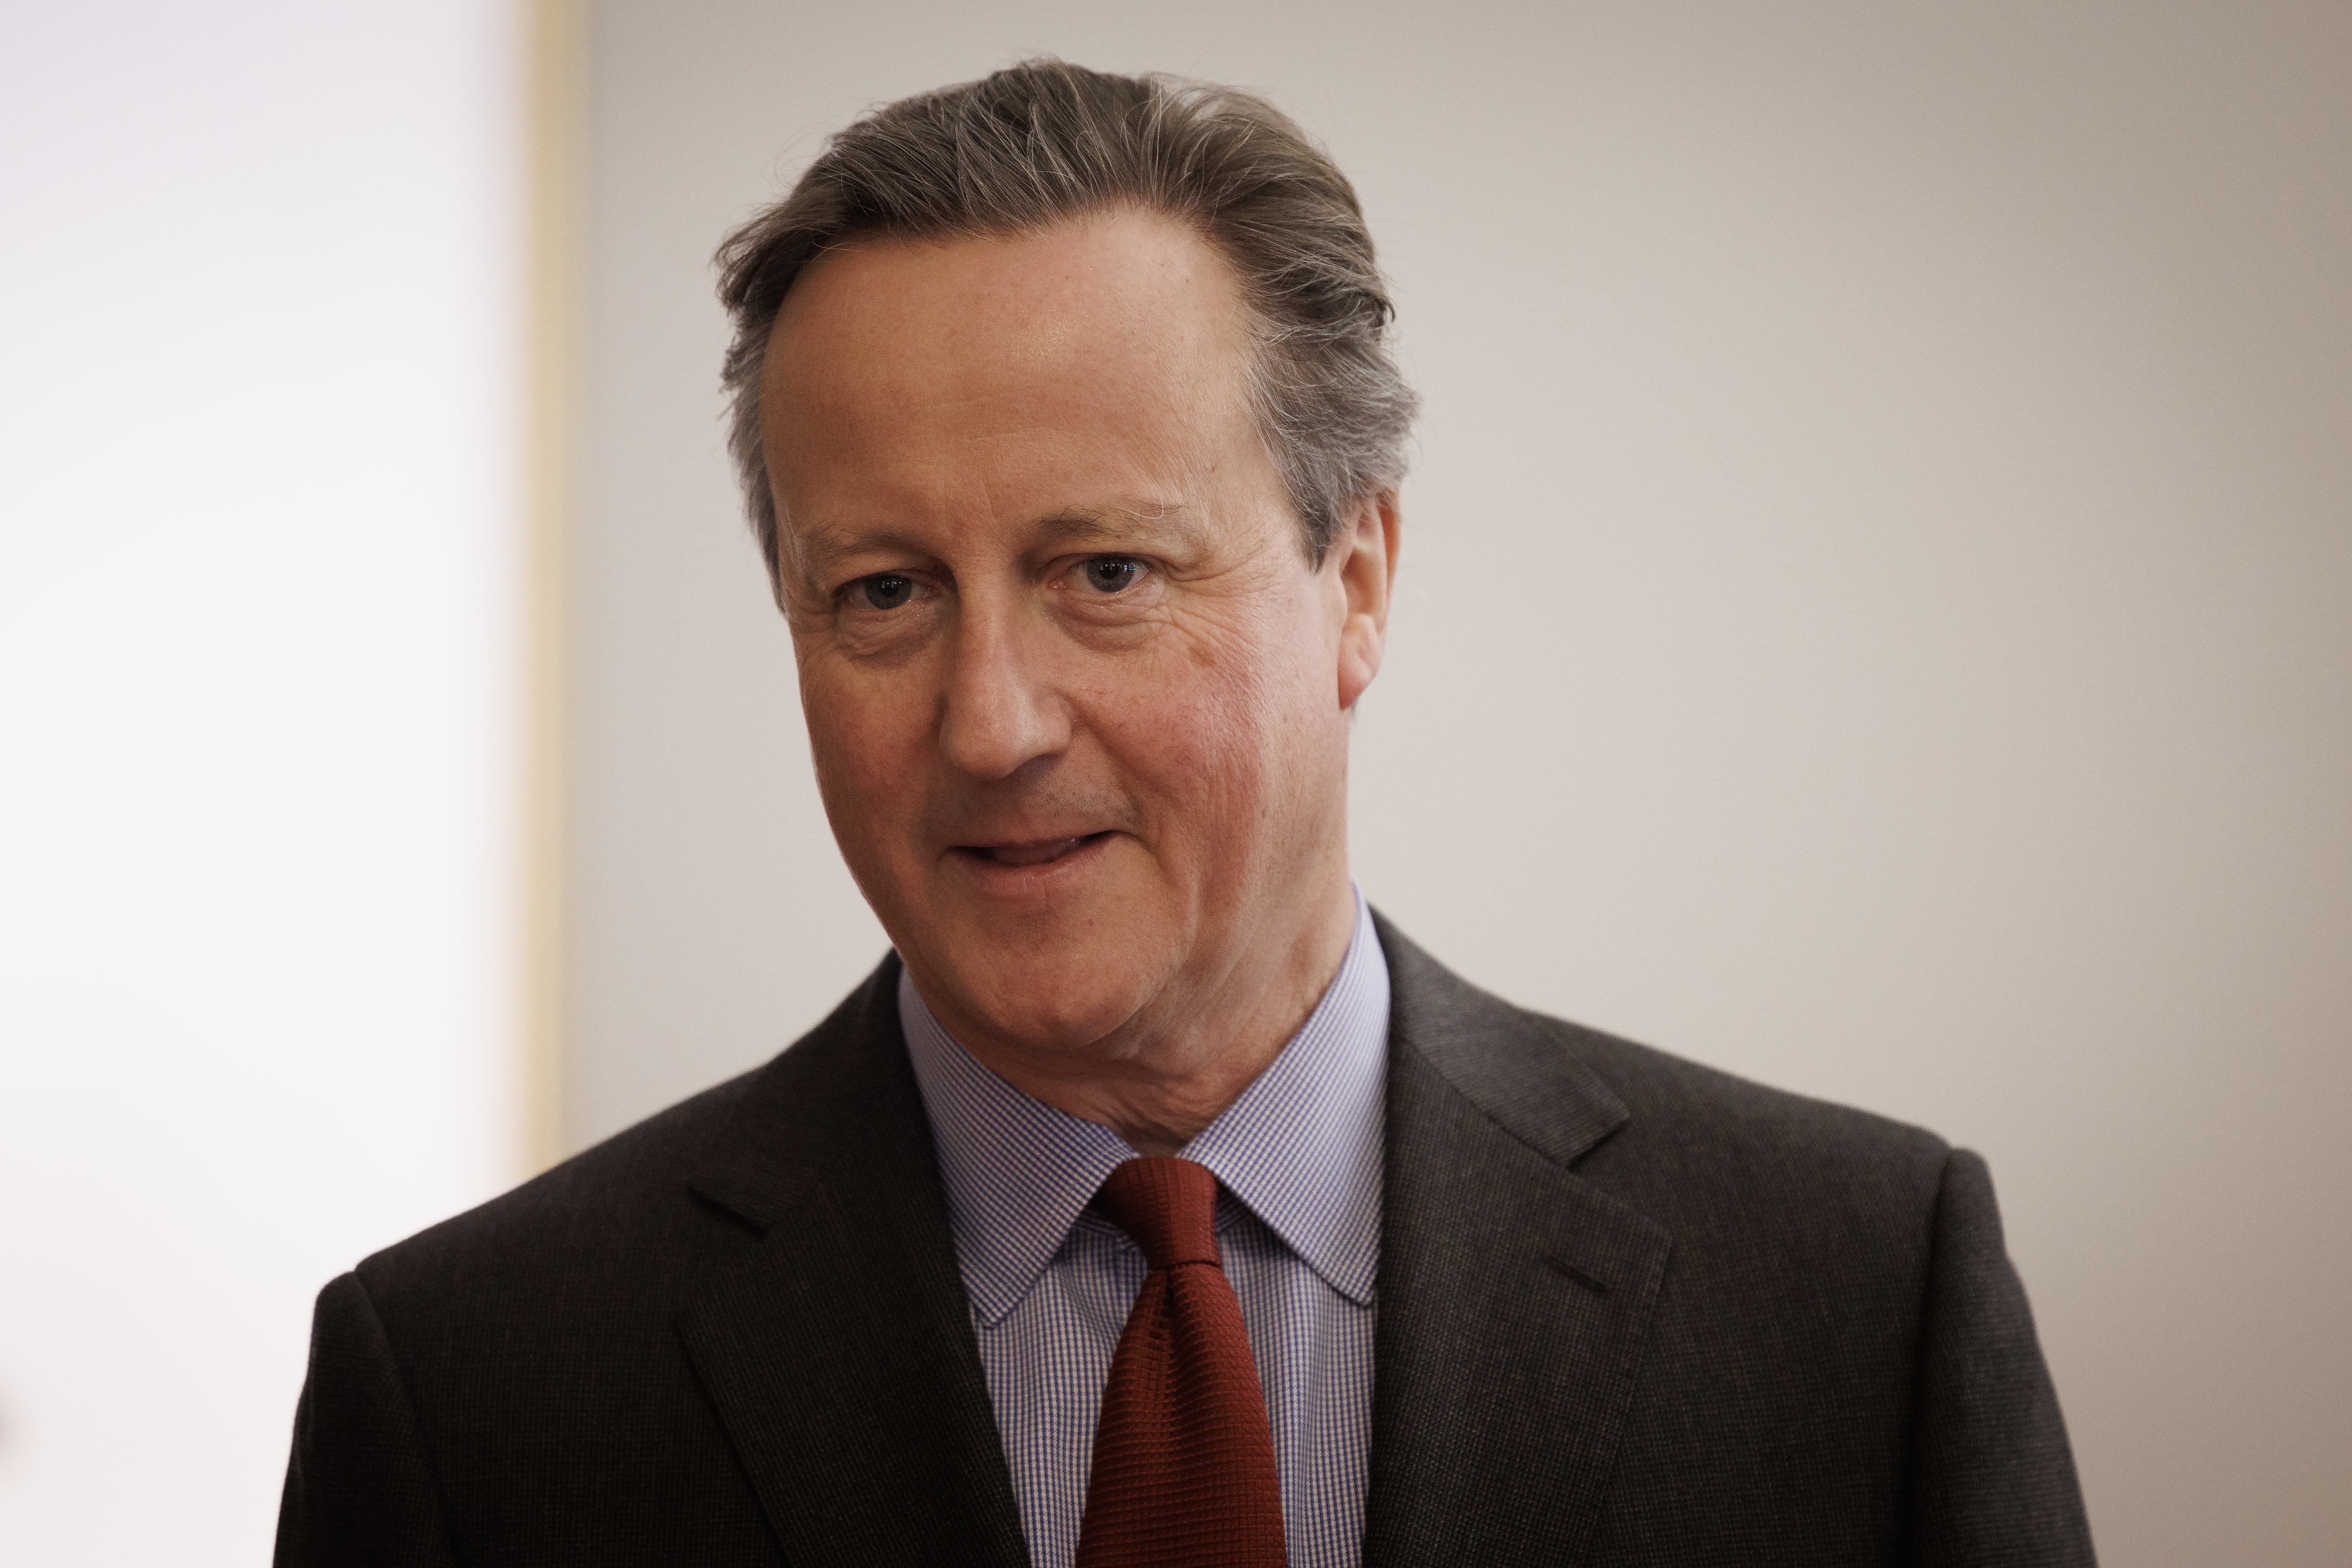 Lord Cameron said Britain wants a ceasefire in Gaza, “but only if it is sustainable”